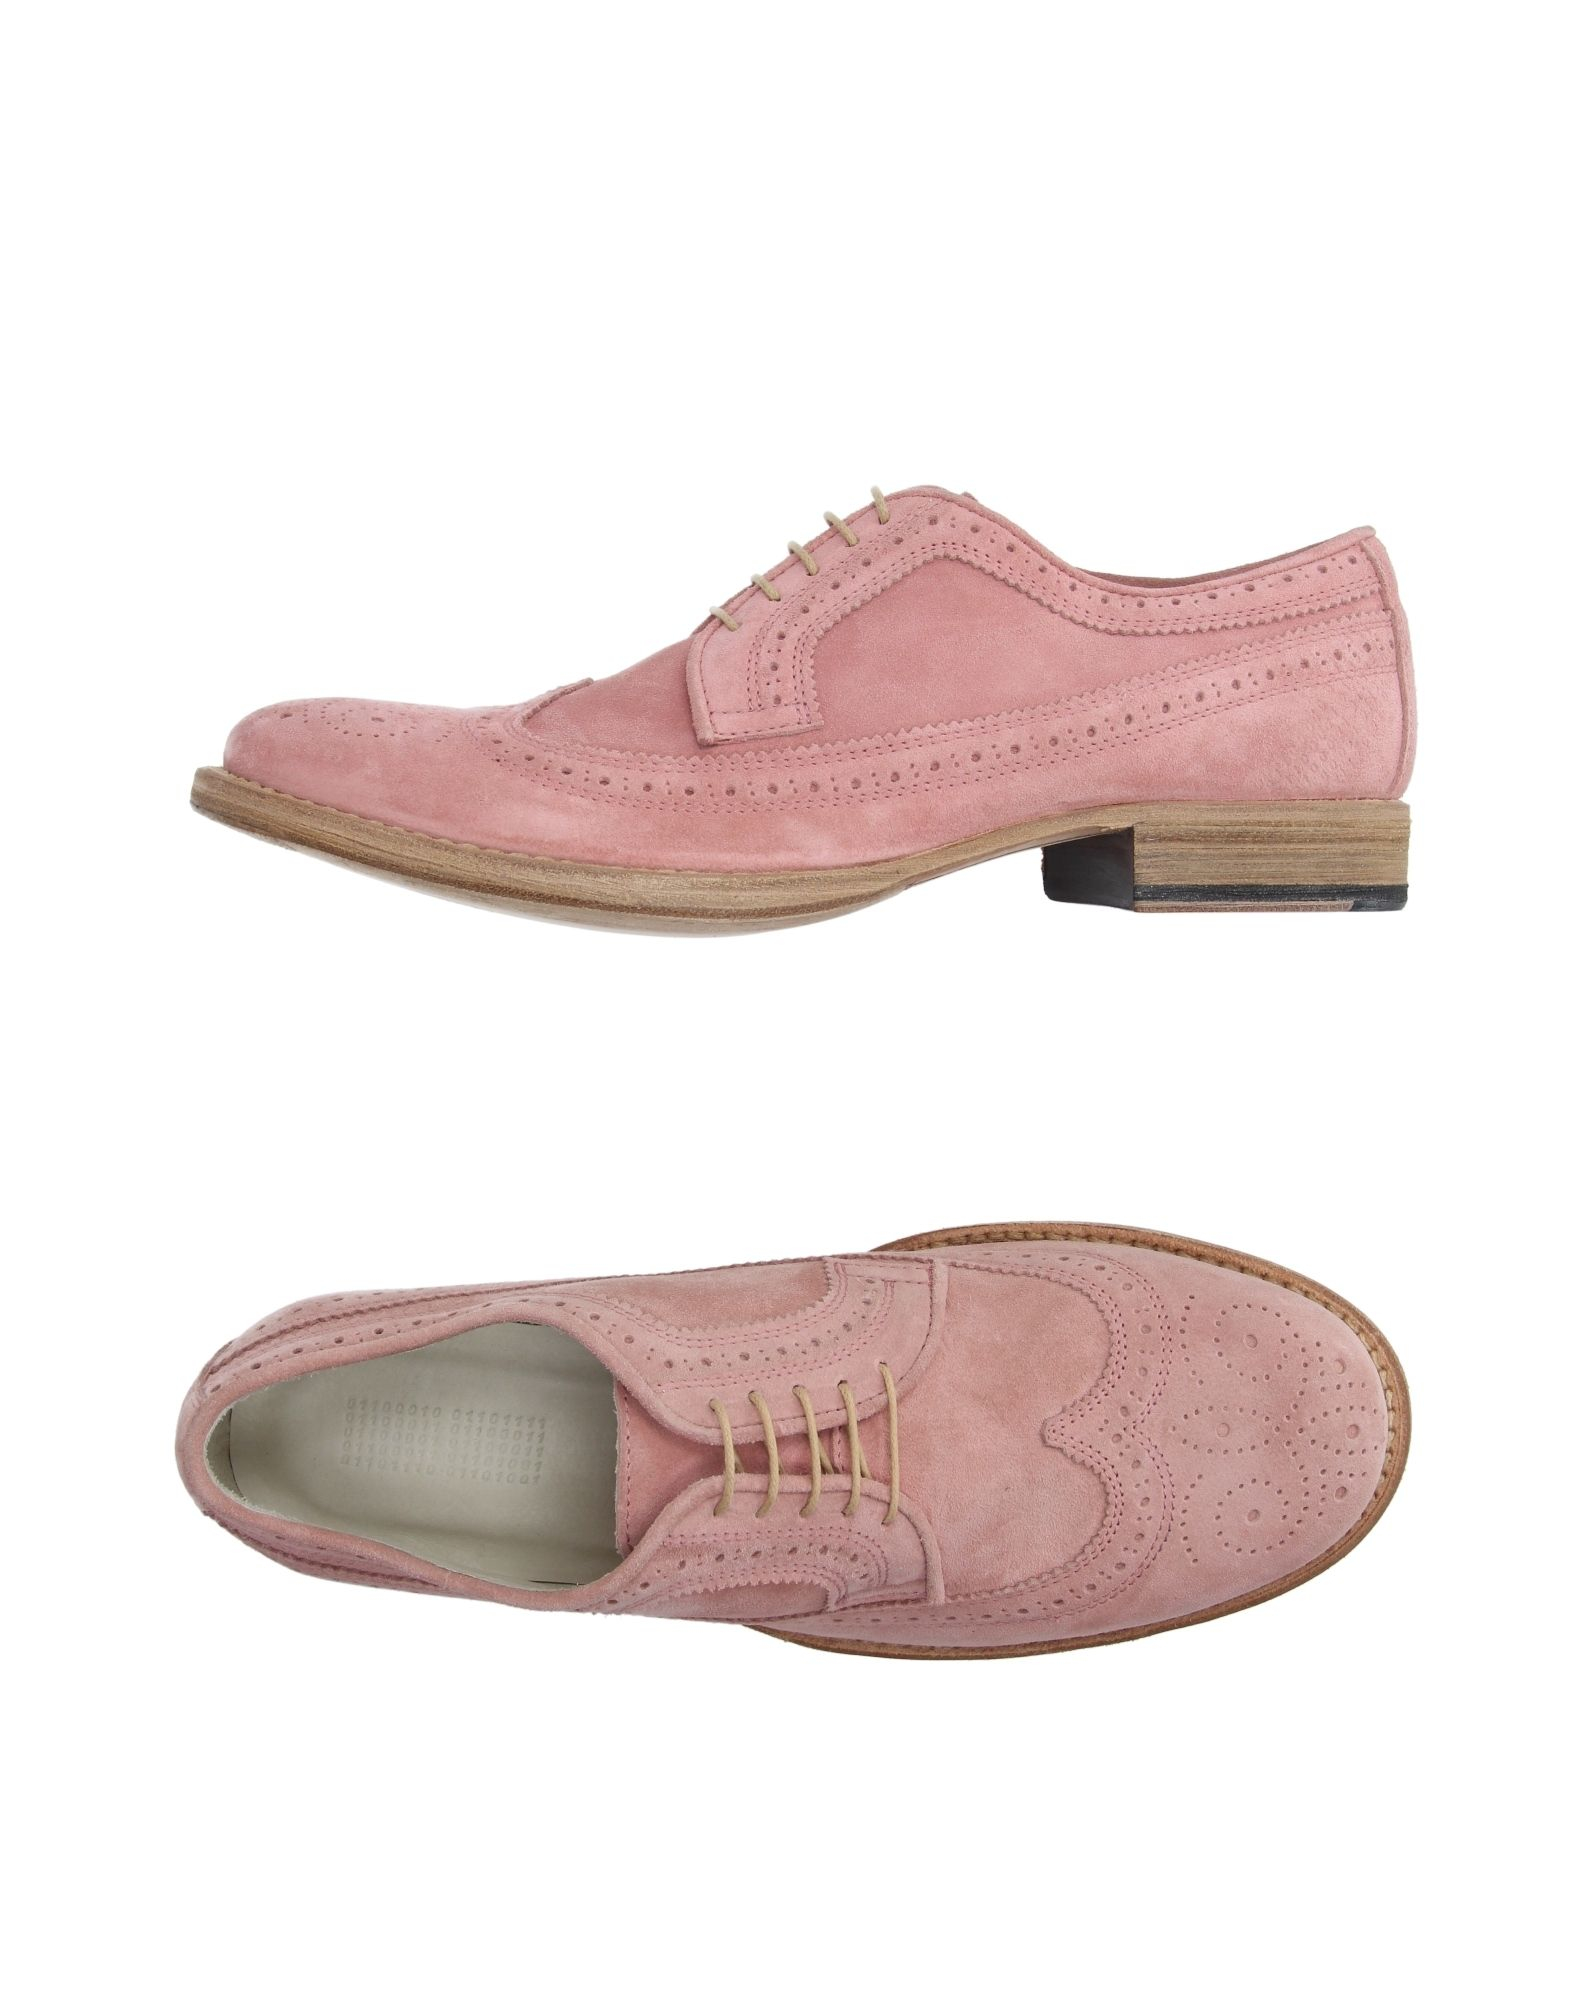 01000010 by boccaccini Laceup Shoes in Pink for Men